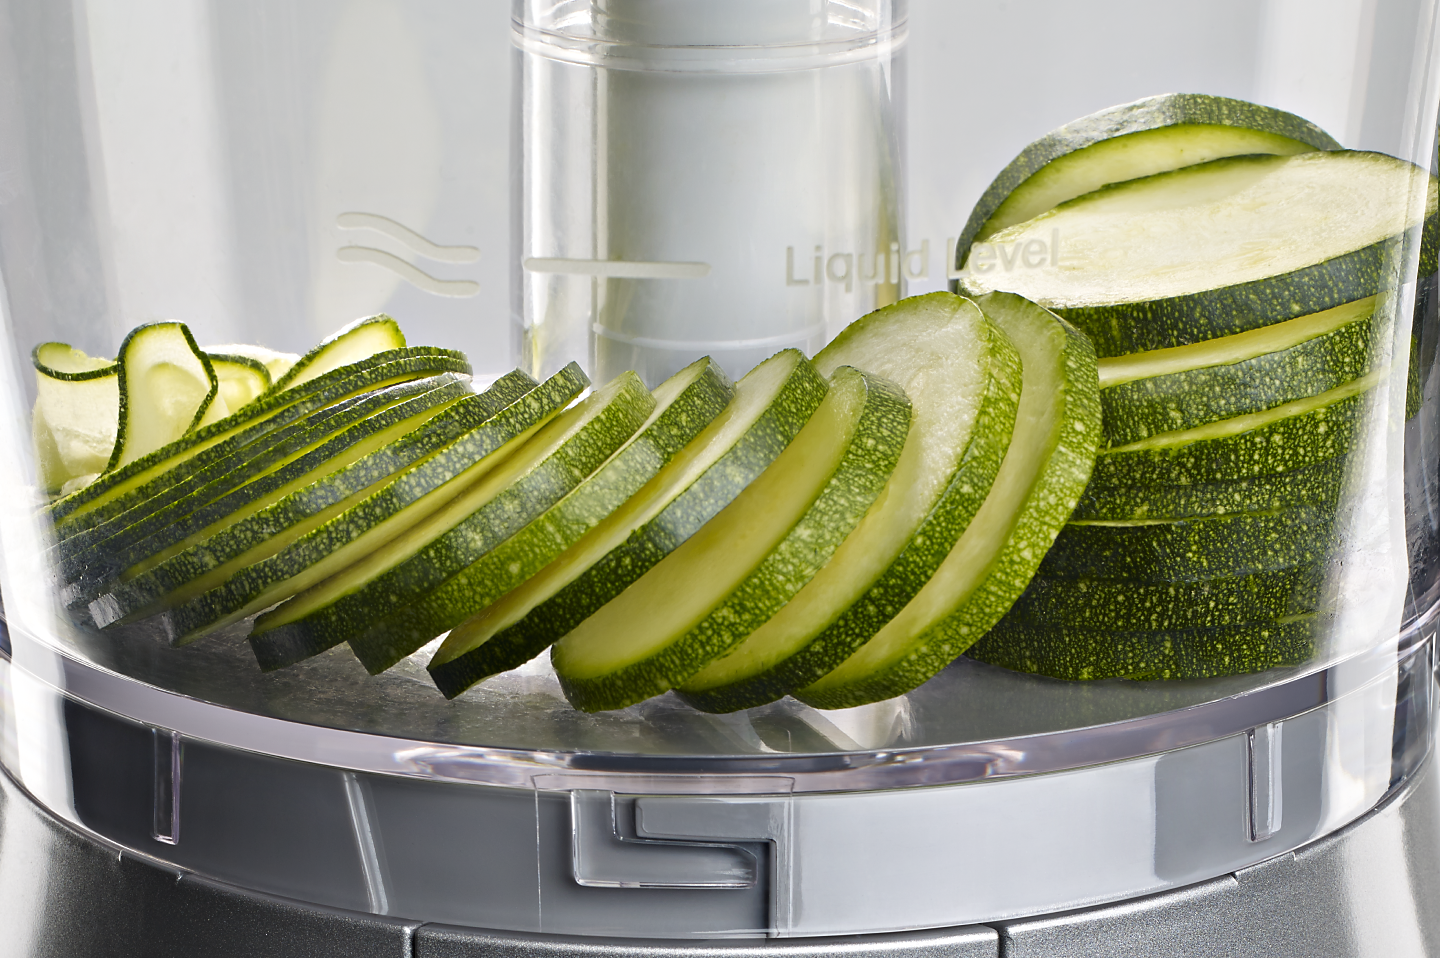 Close up image of sliced cucumbers inside a food processor work bowl